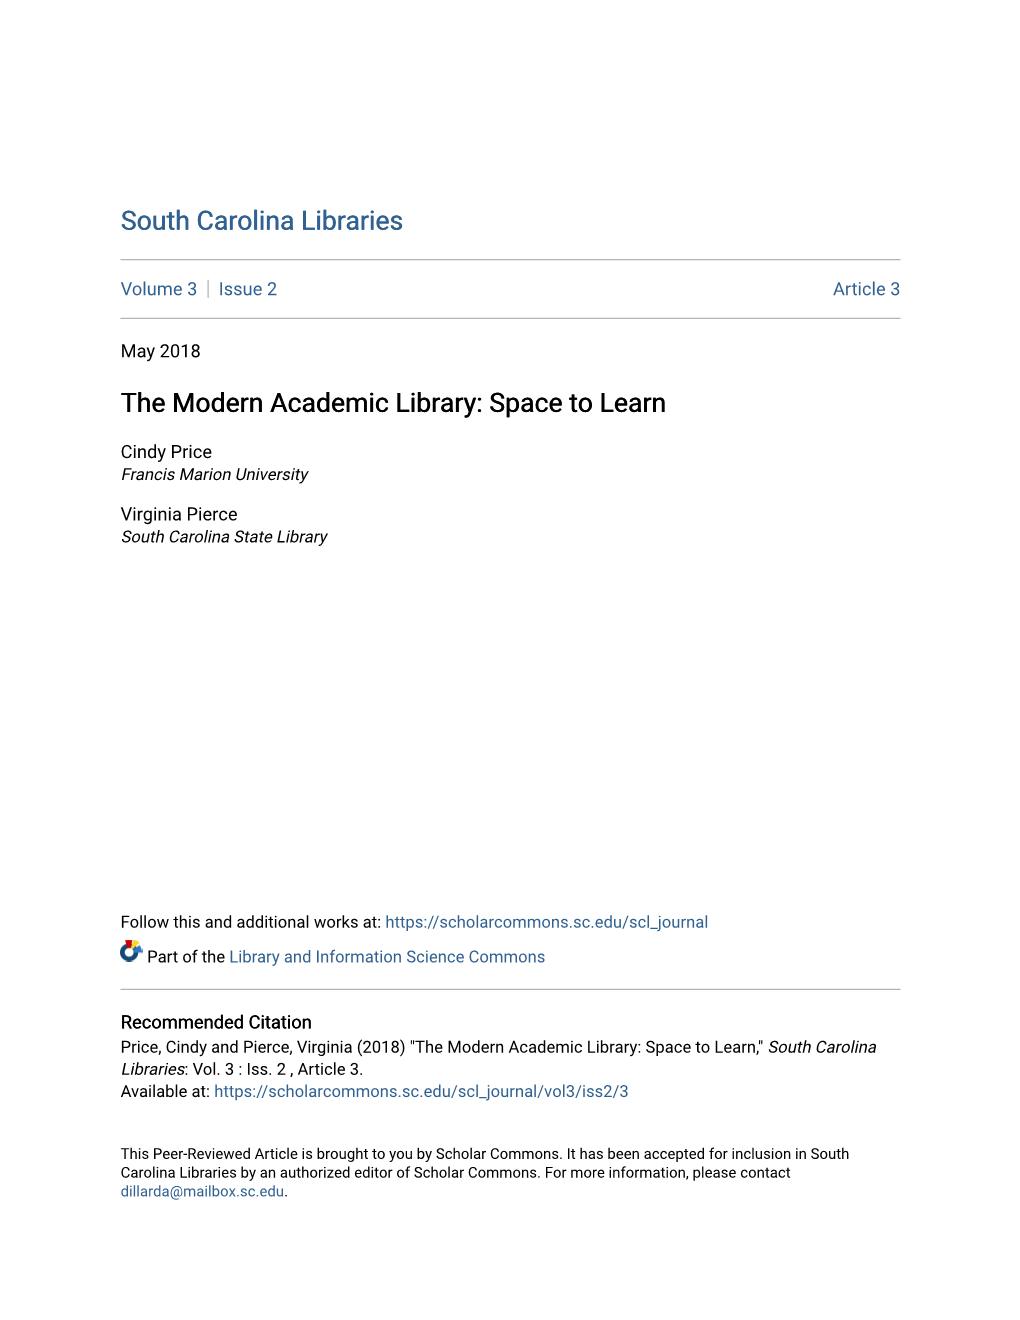 The Modern Academic Library: Space to Learn